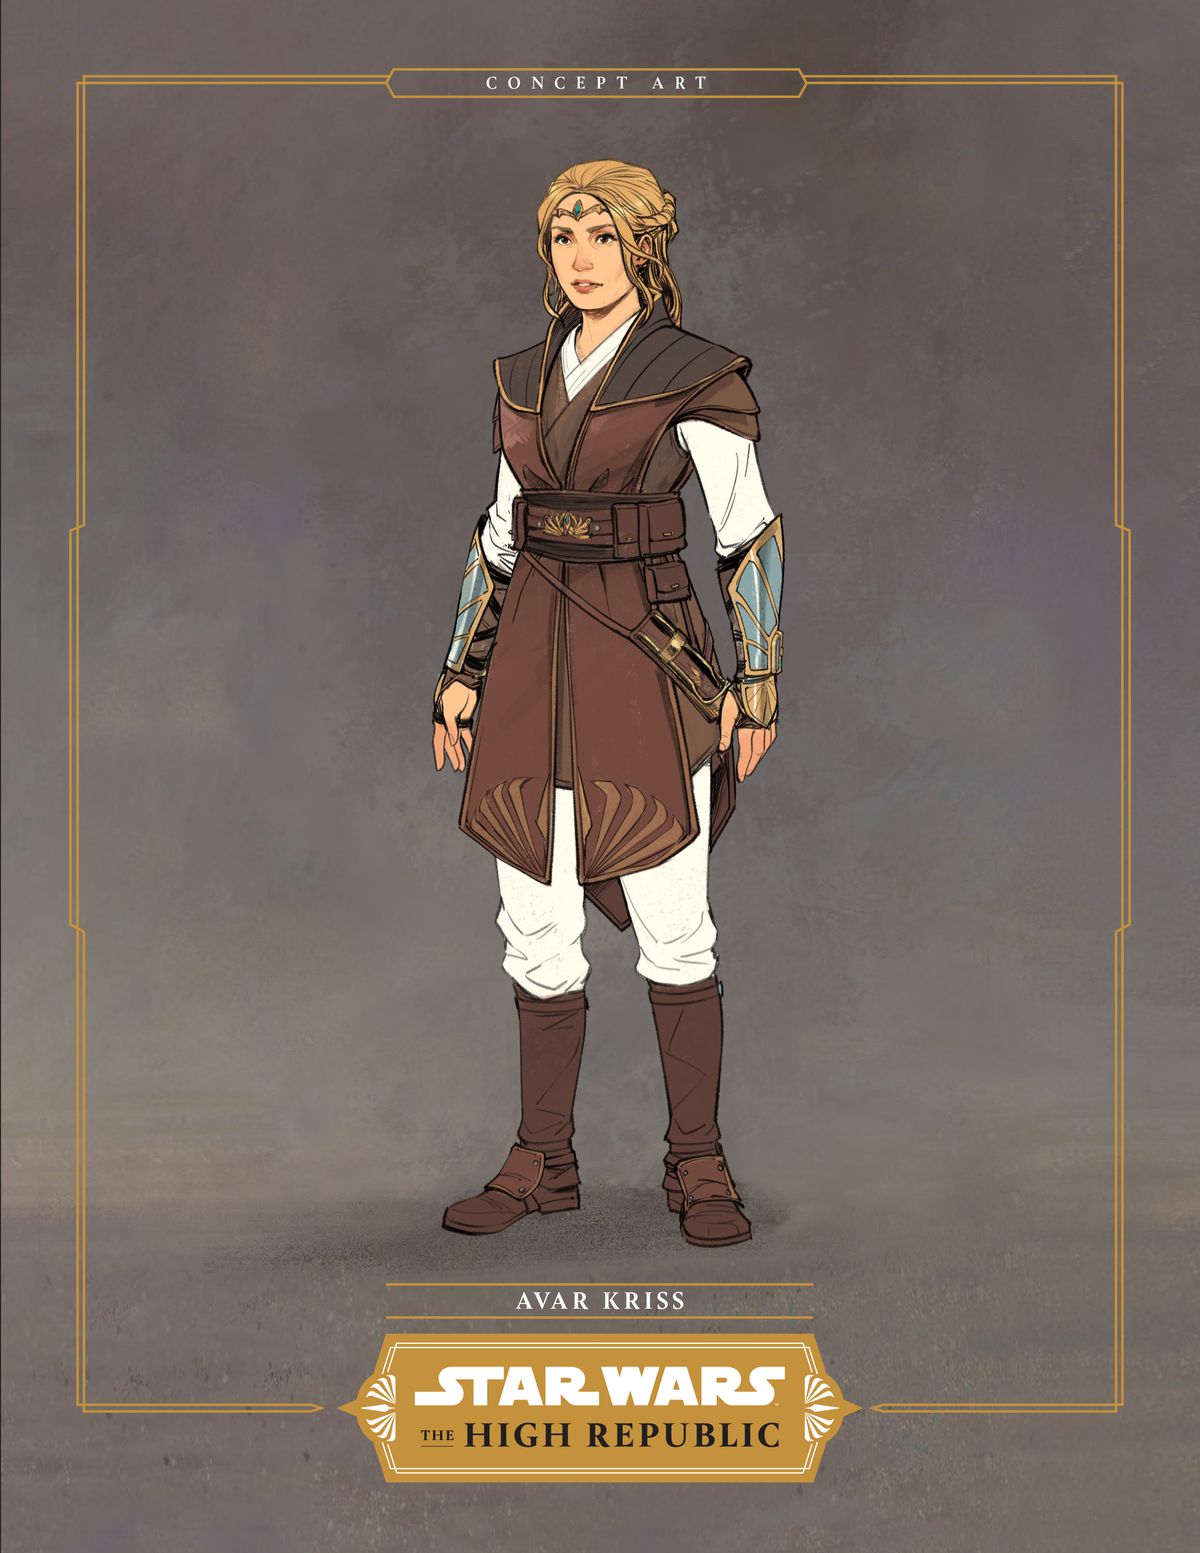 Avar Kriss in brown and white Jedi traveling clothes.